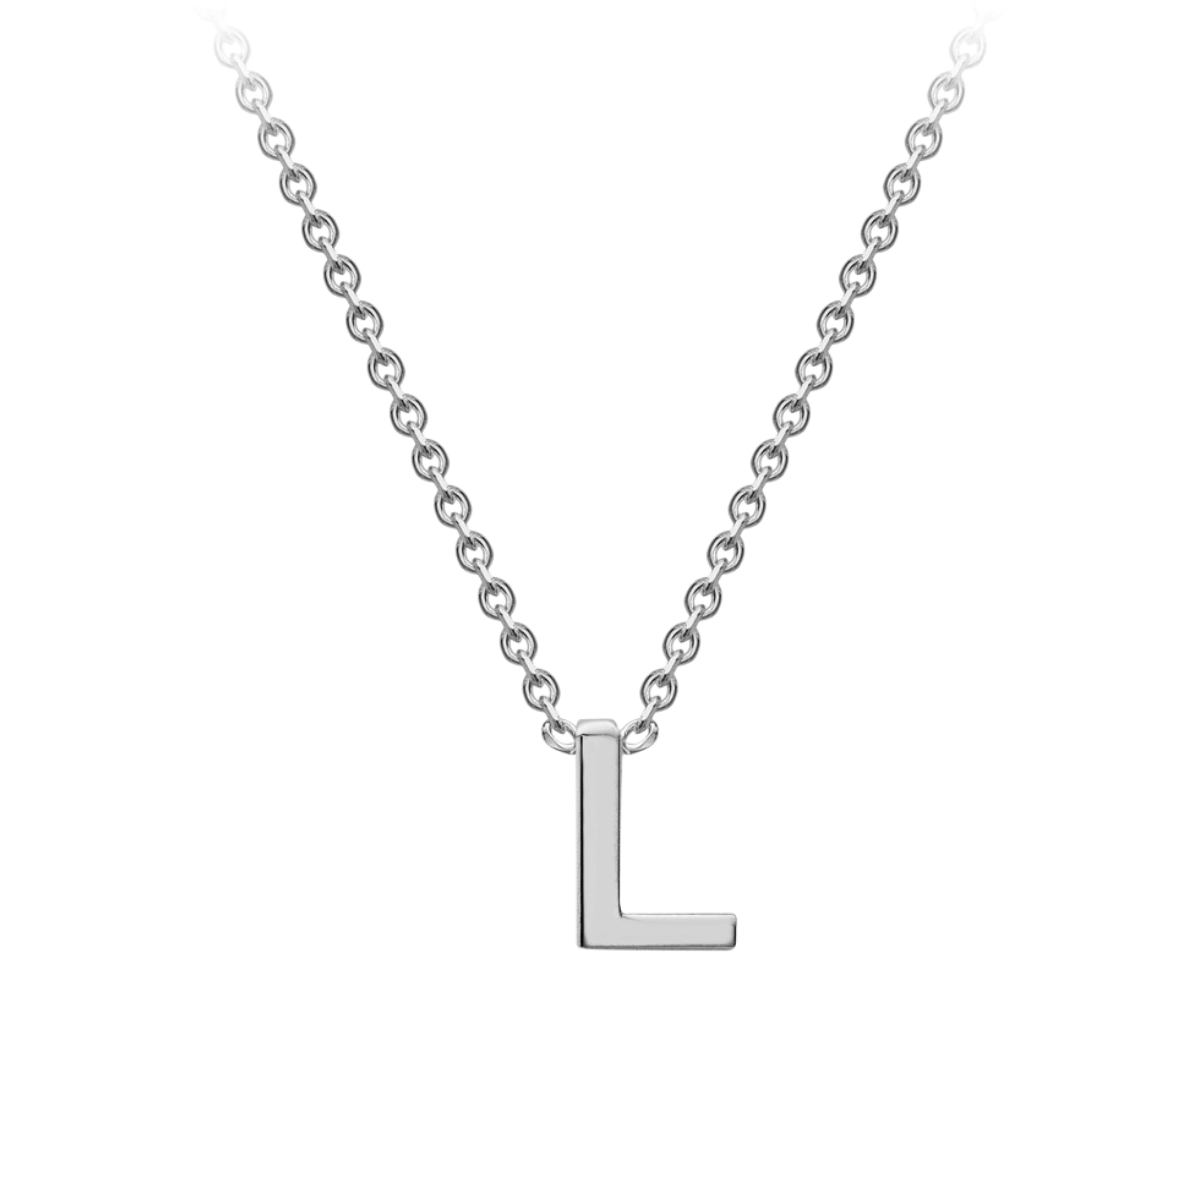 PETITE 'L' INITIAL NECKLACE | 9K SOLID WHITE GOLD